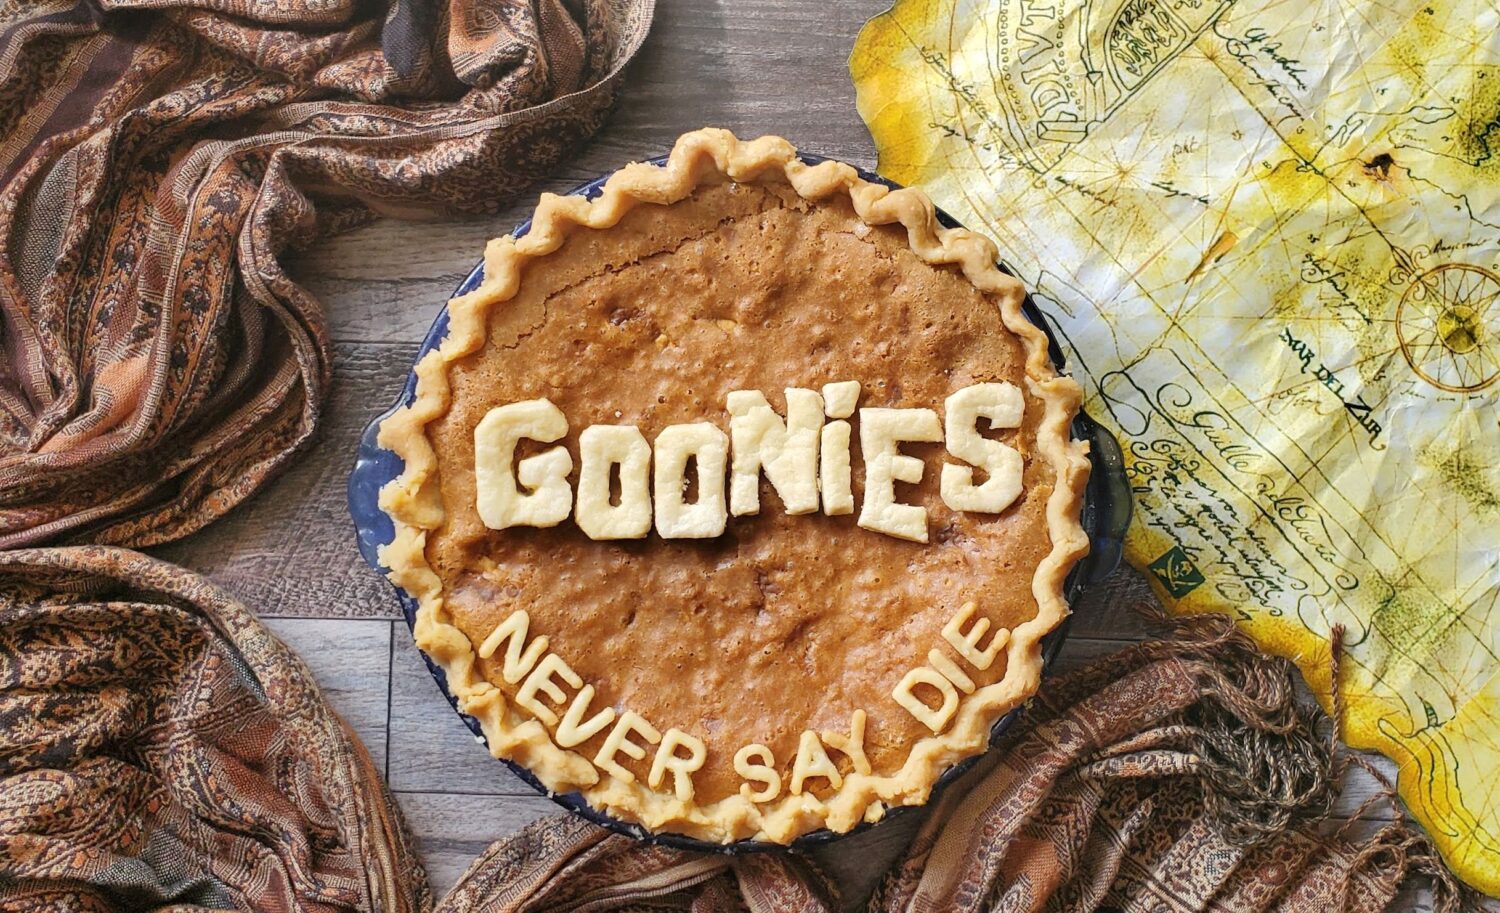 Goonies Baby Ruth Pie-Never Say Die! Gooey cookie batter pie loaded with chopped up Baby Ruth bars. Chunk & Sloth never had it so good.